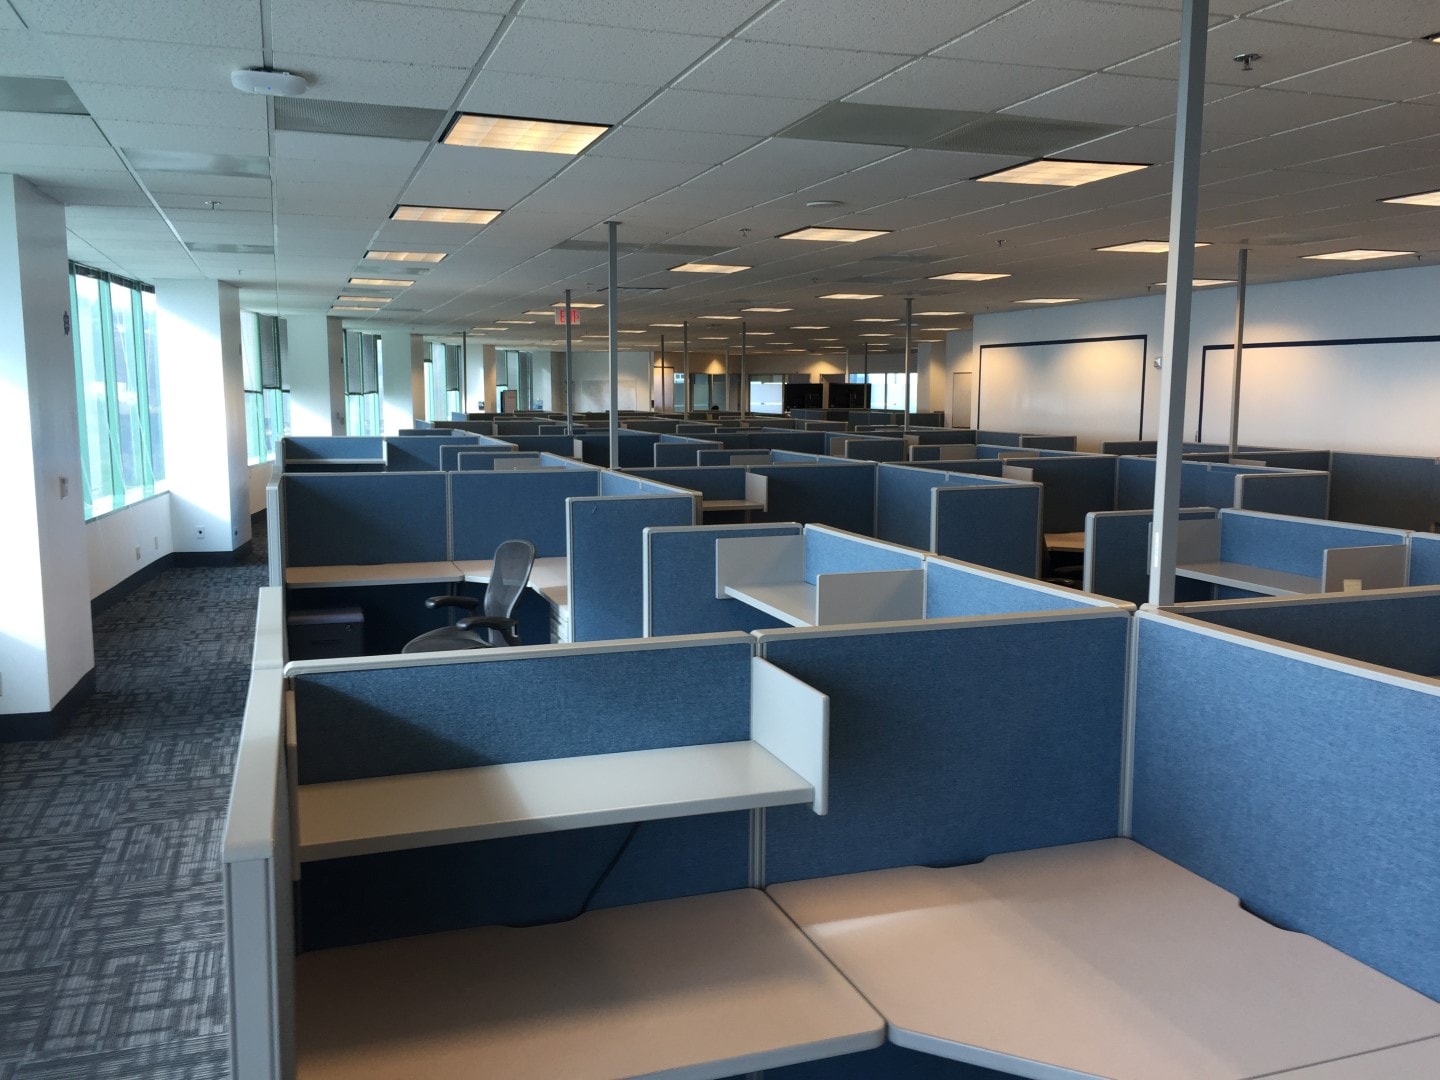 Cubicles with short panels